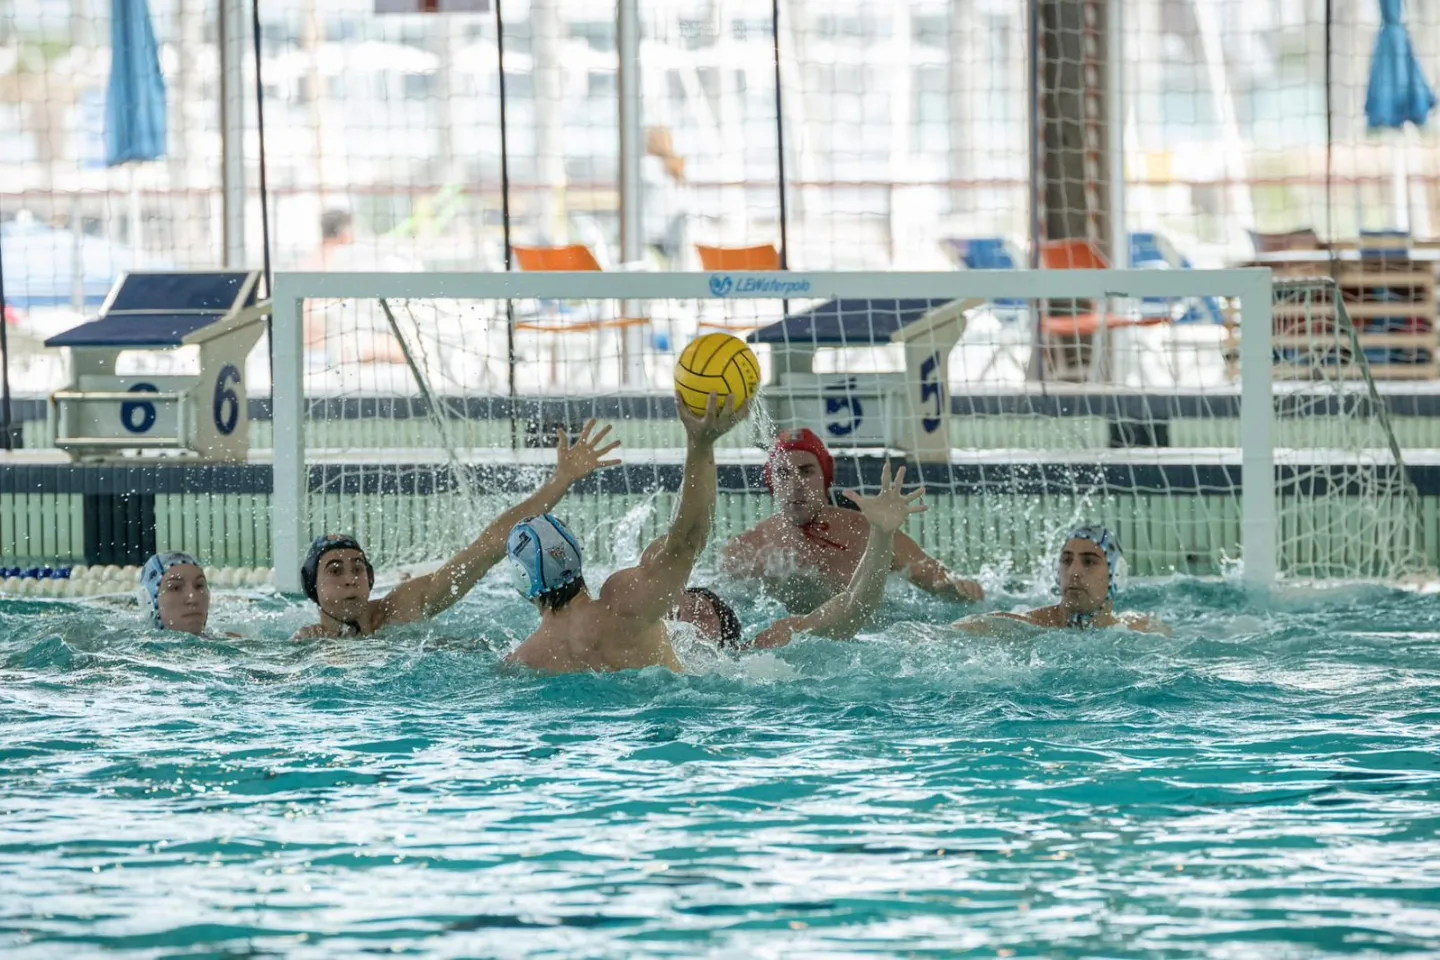 LEWaterpolo J22 (2)